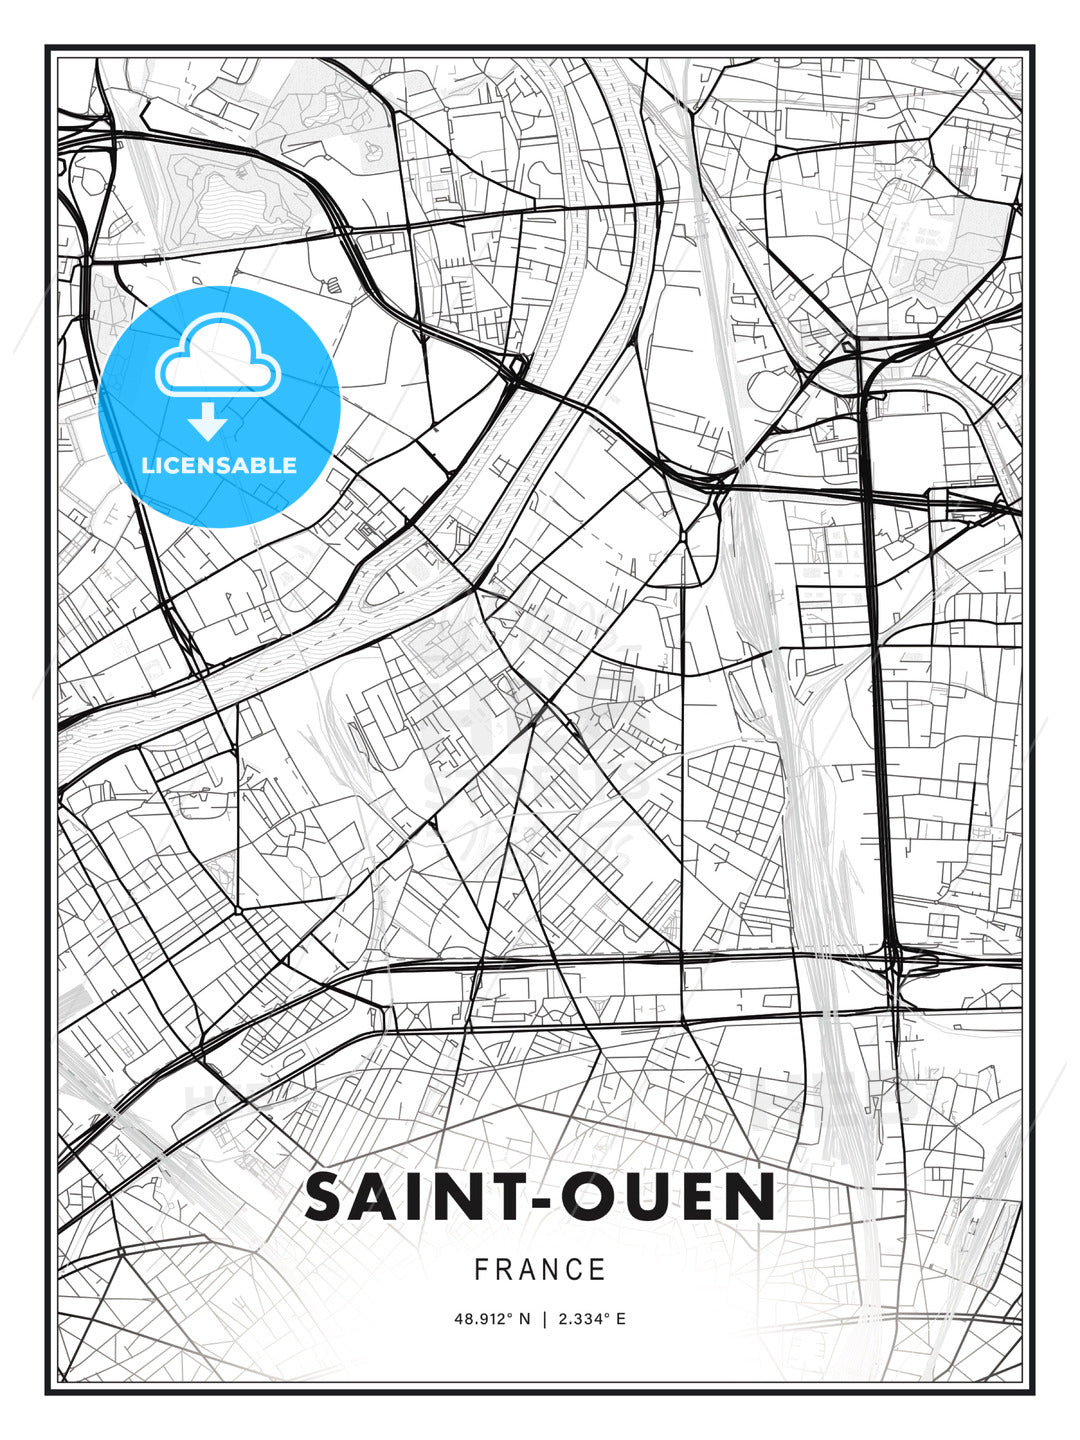 Saint-Ouen, France, Modern Print Template in Various Formats - HEBSTREITS Sketches